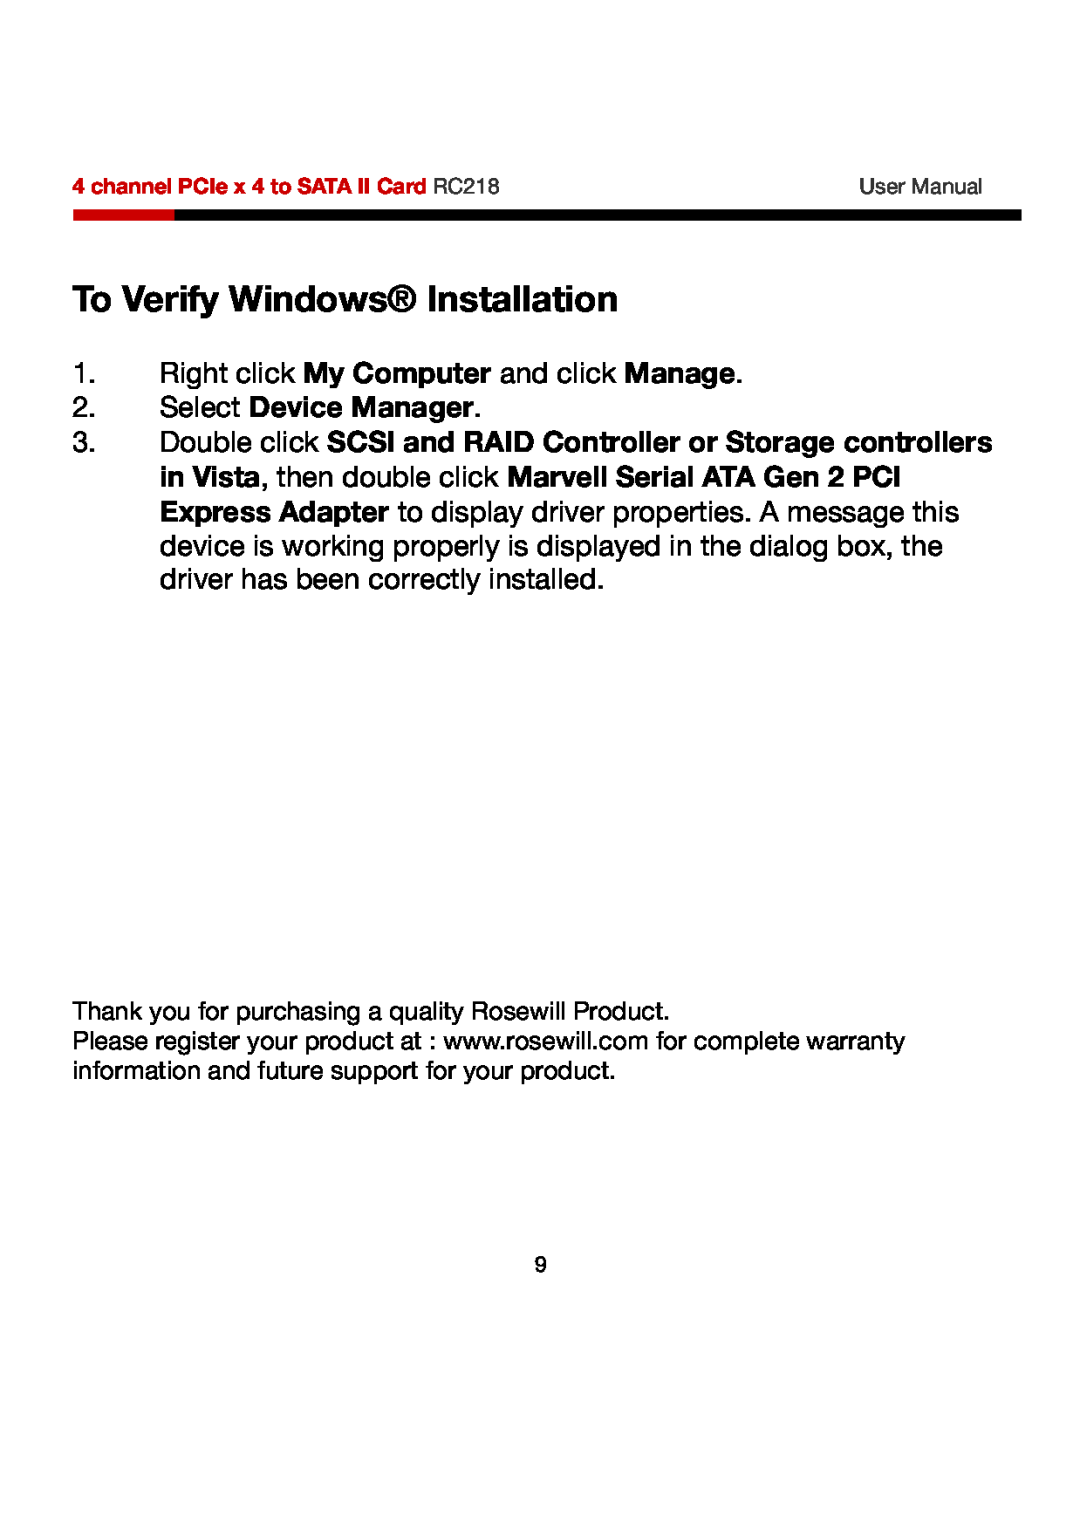 Rosewill RC218 user manual To Verify Windows Installation 